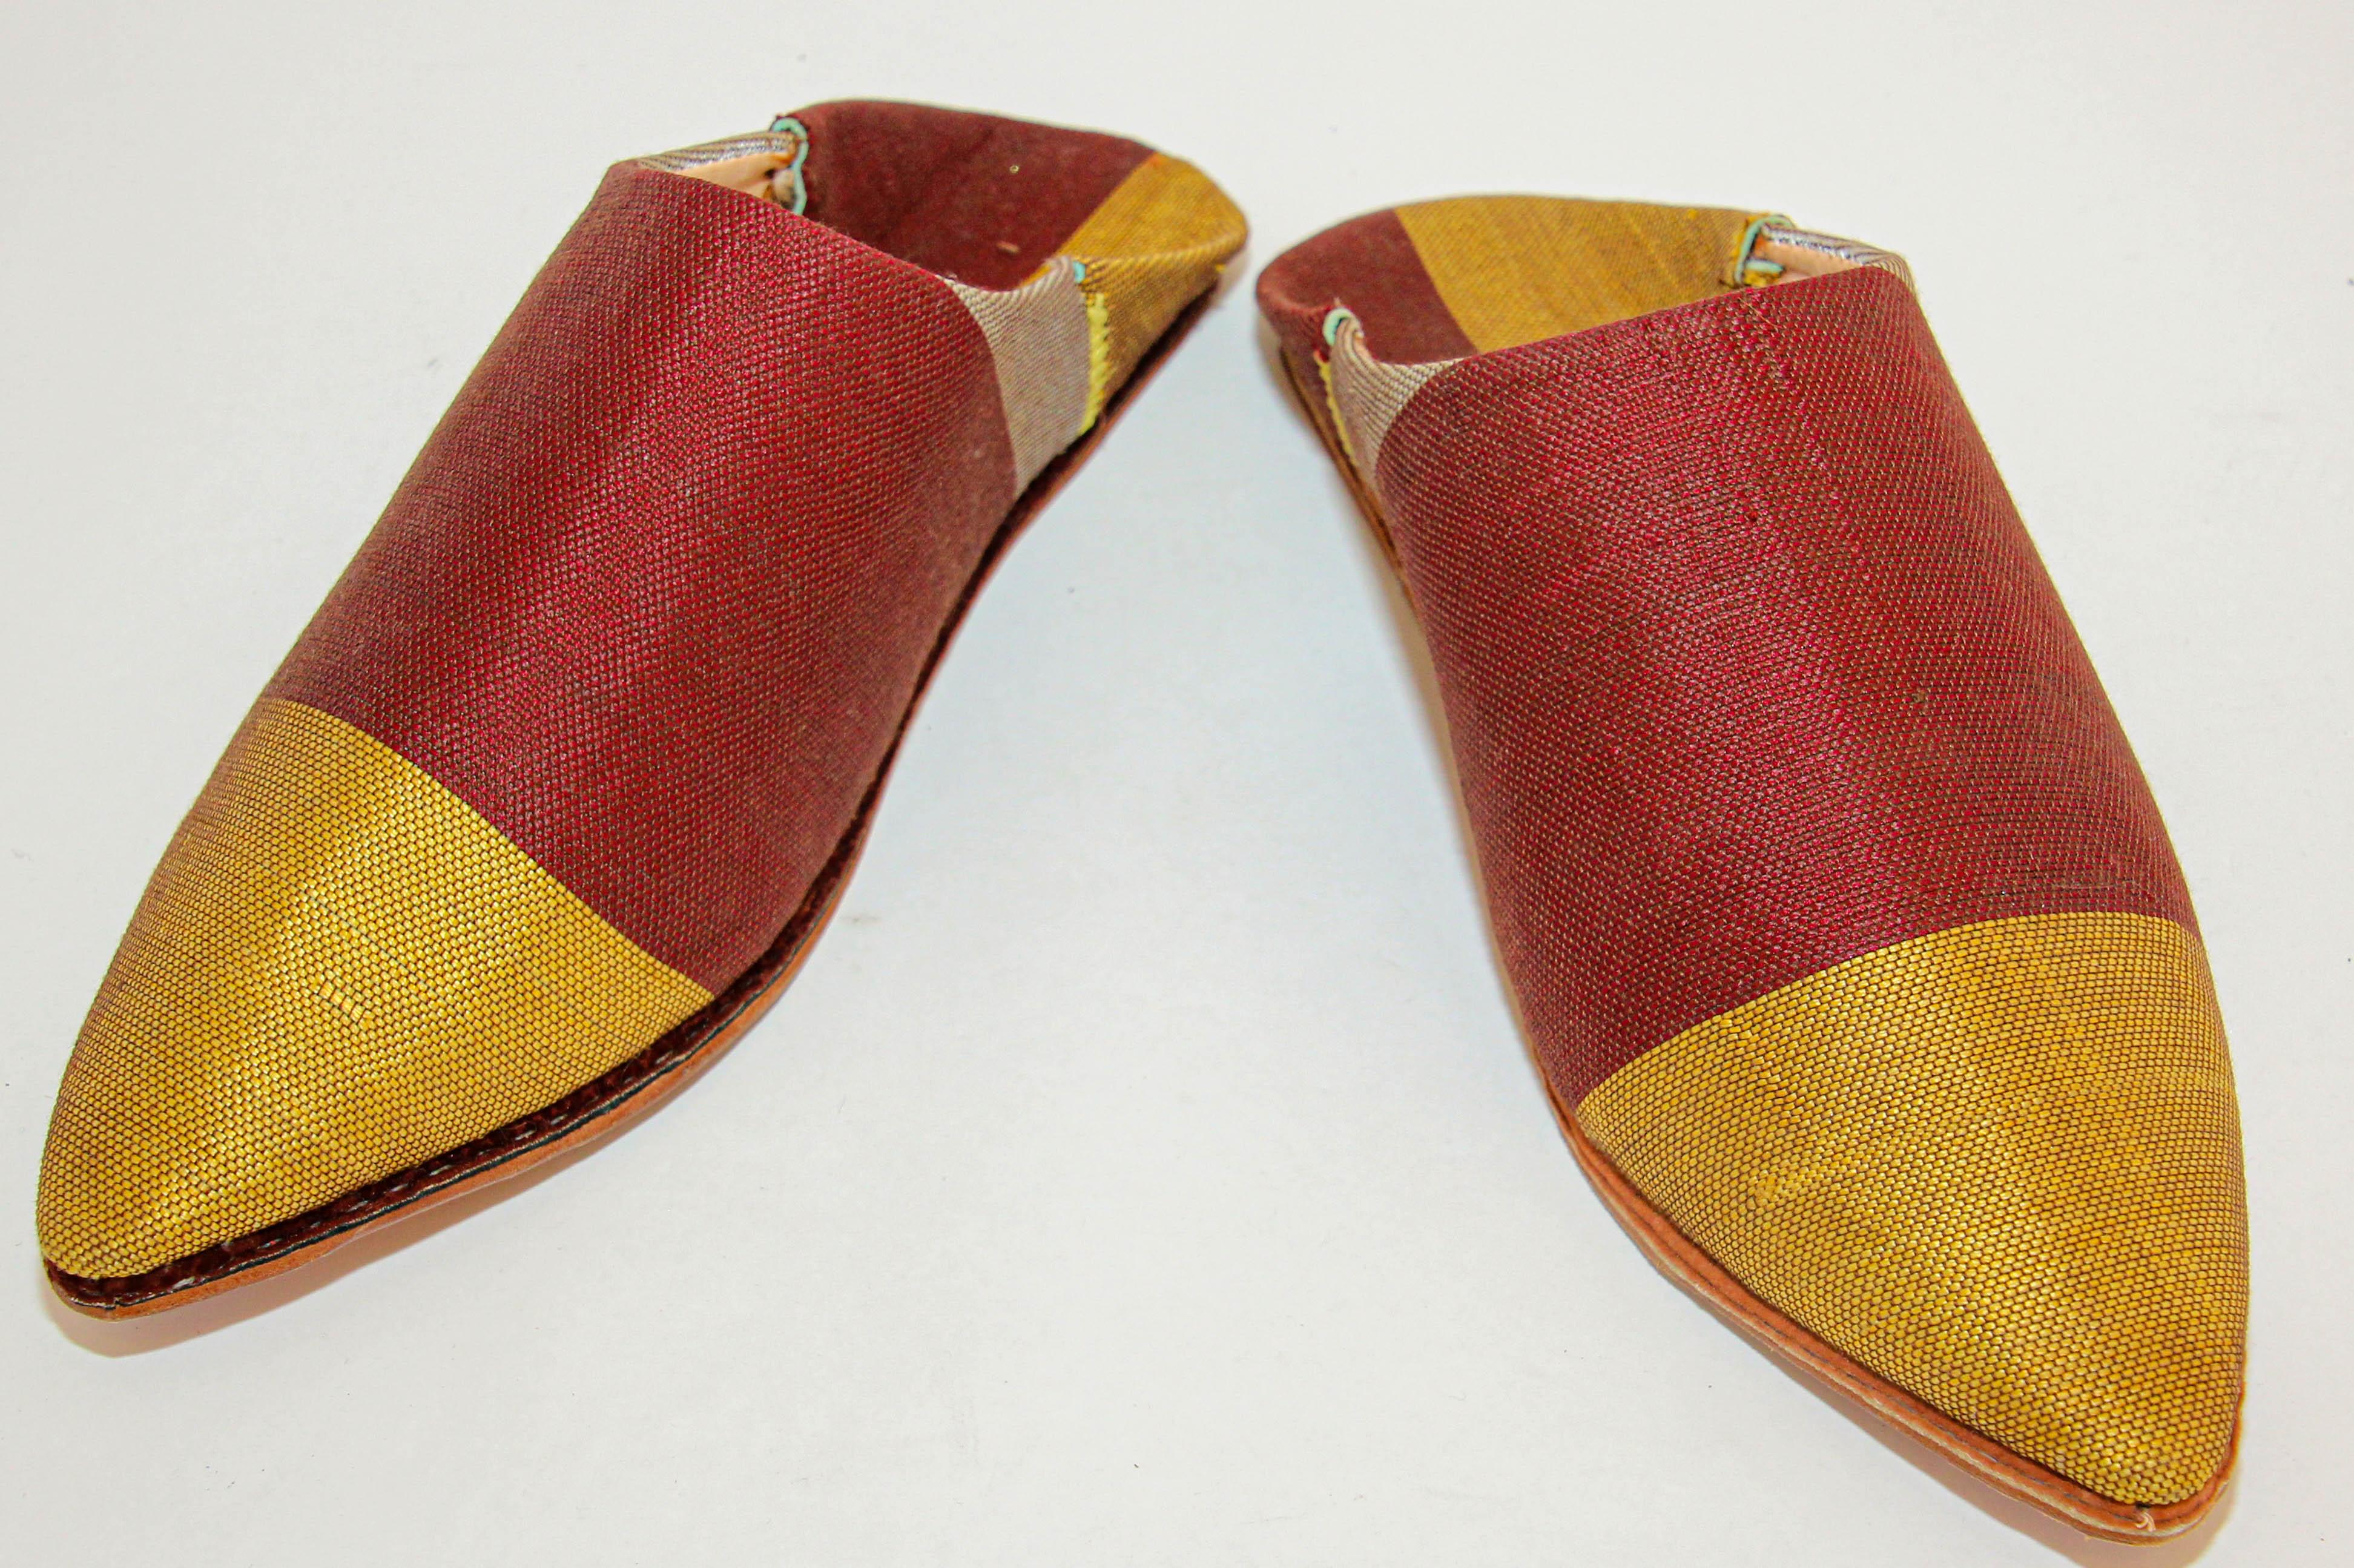 Moroccan Silk Slippers Babouches, chic and soft.
These Moroccan silk slippers are handmade to perfection the inside sole is crafted of soft leather, hand-sewn leather sole.
You won't want to take the Moroccan babouches off your feet!
Moroccan